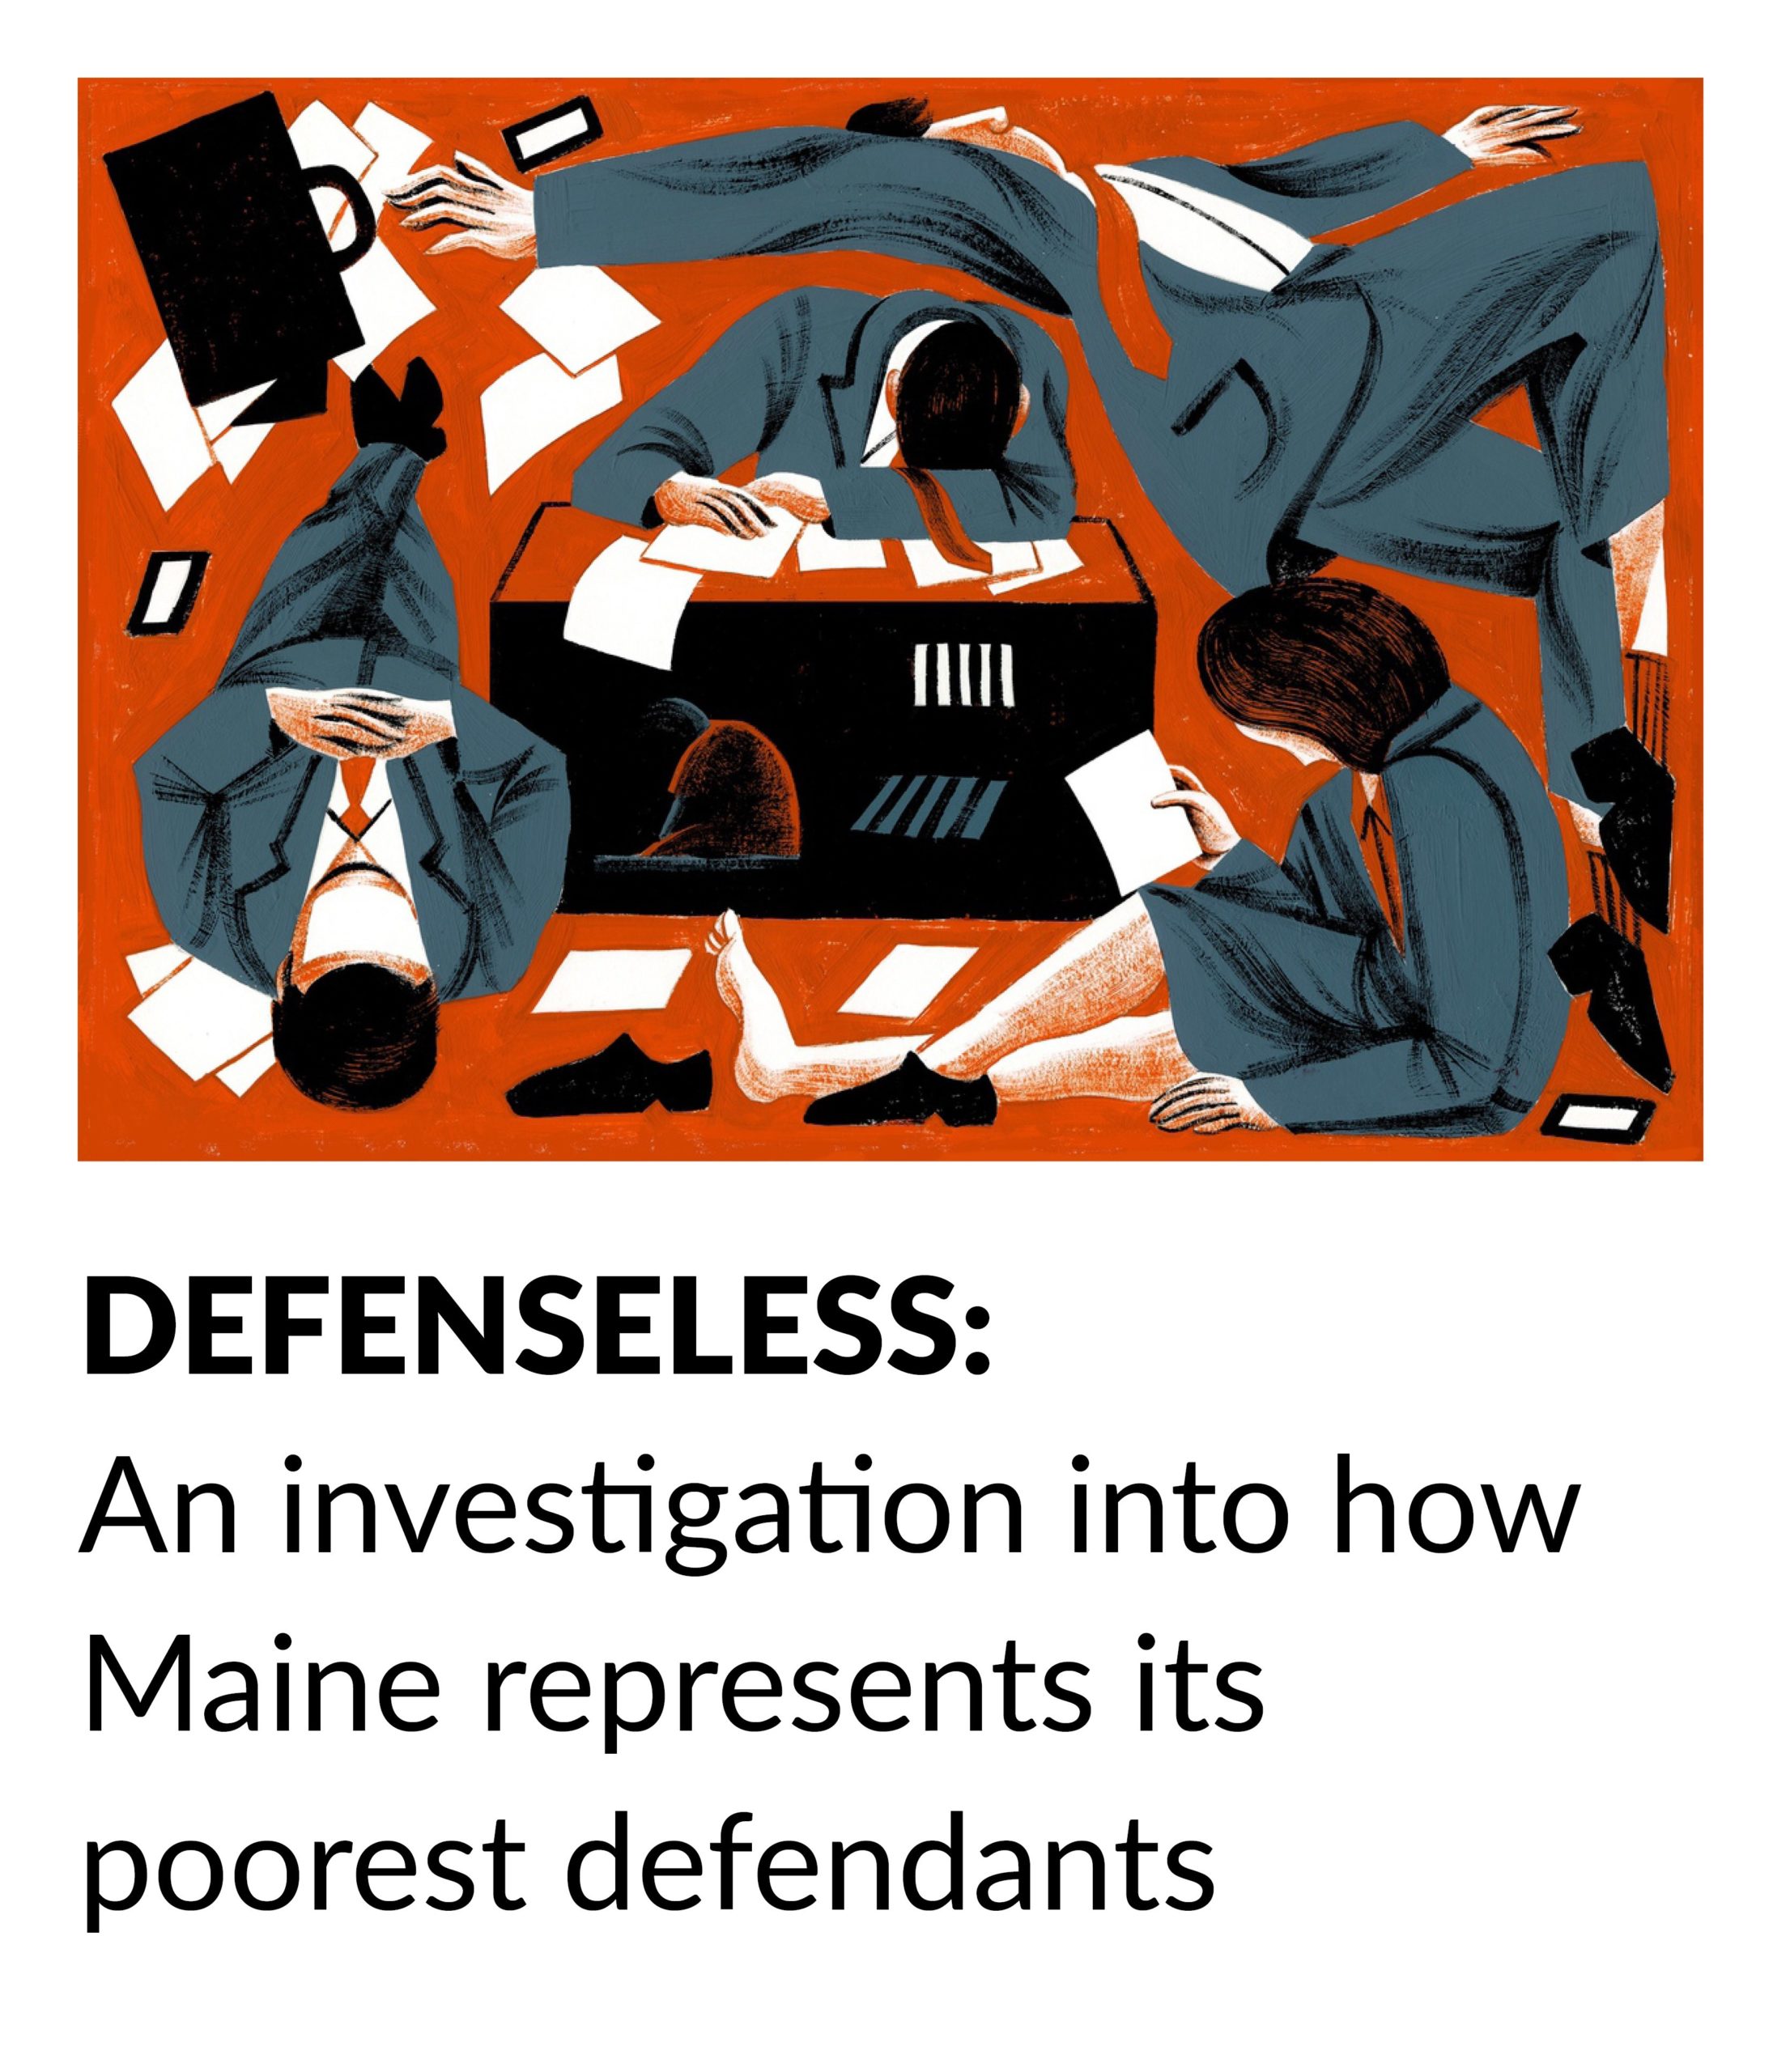 Defenseless: An investigation into how Maine represents its poorest defendants